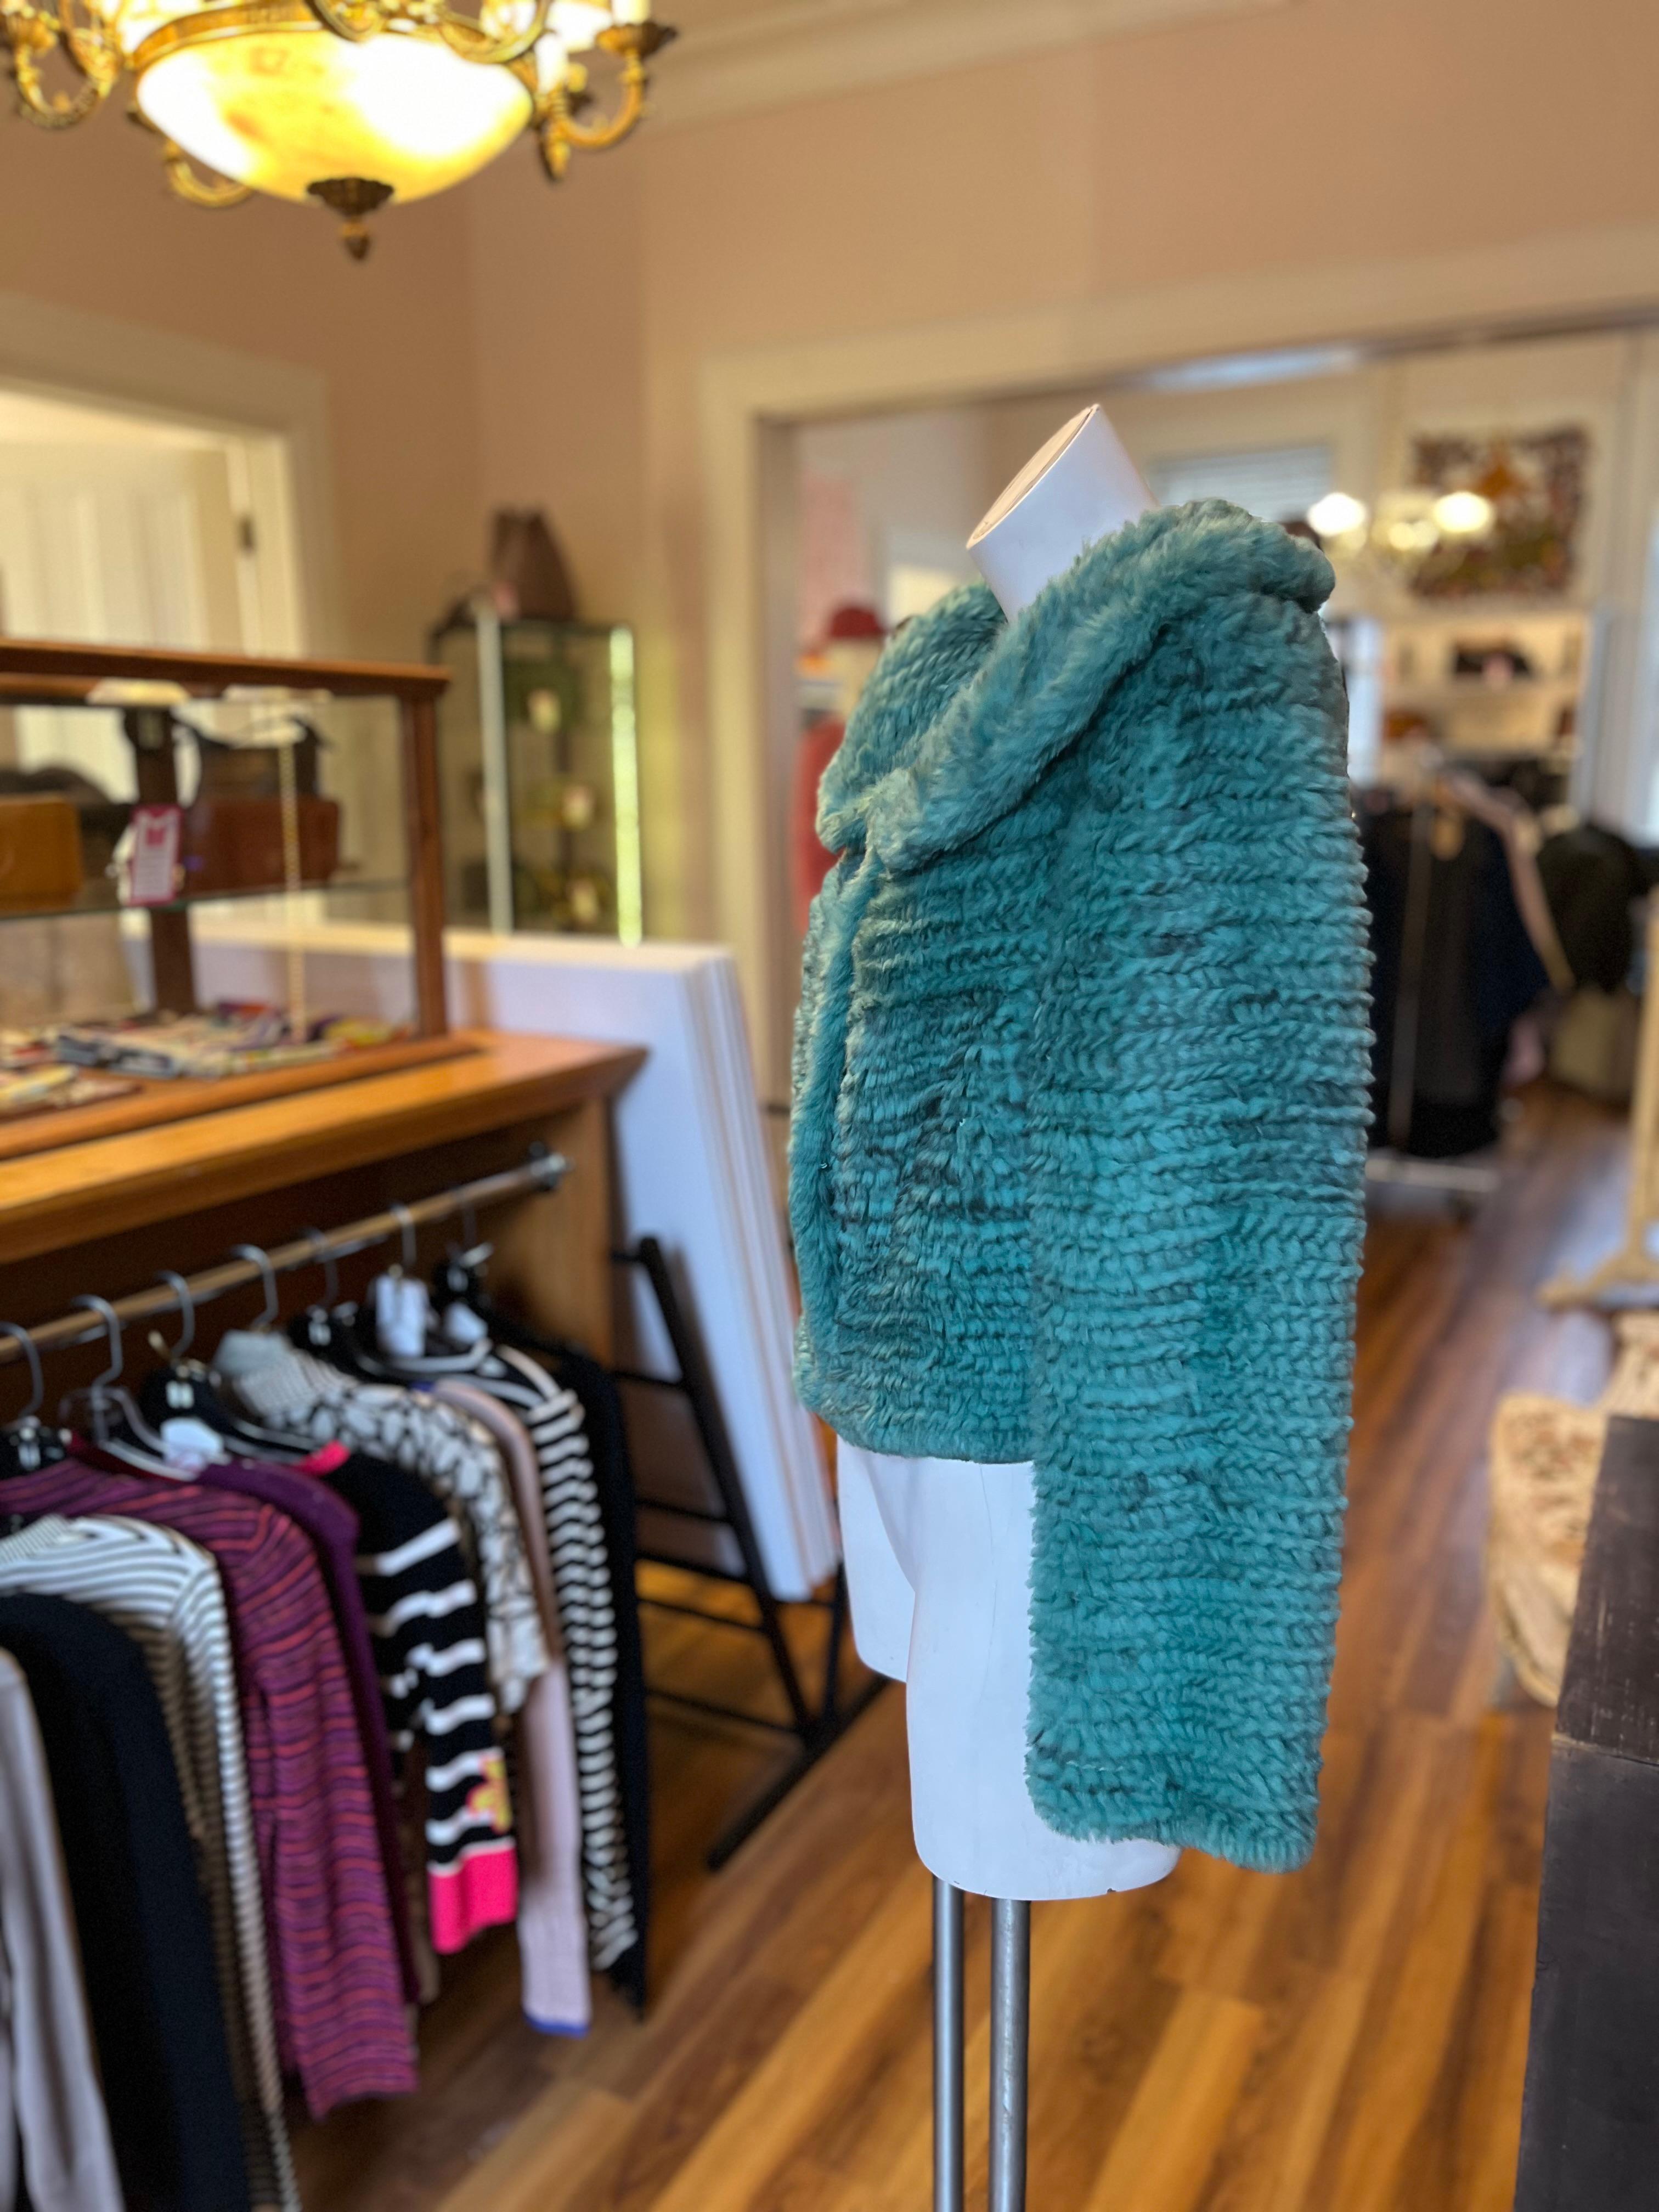 From the fashion house of Alberta Ferretti, this is a Philosophy di Alberta Ferretti knitted rabbit fur jacket in a beautiful vivid green.
The jacket has a rounded collar; three eyes and hooks for closure; long generous sleeves, and it tapers at the